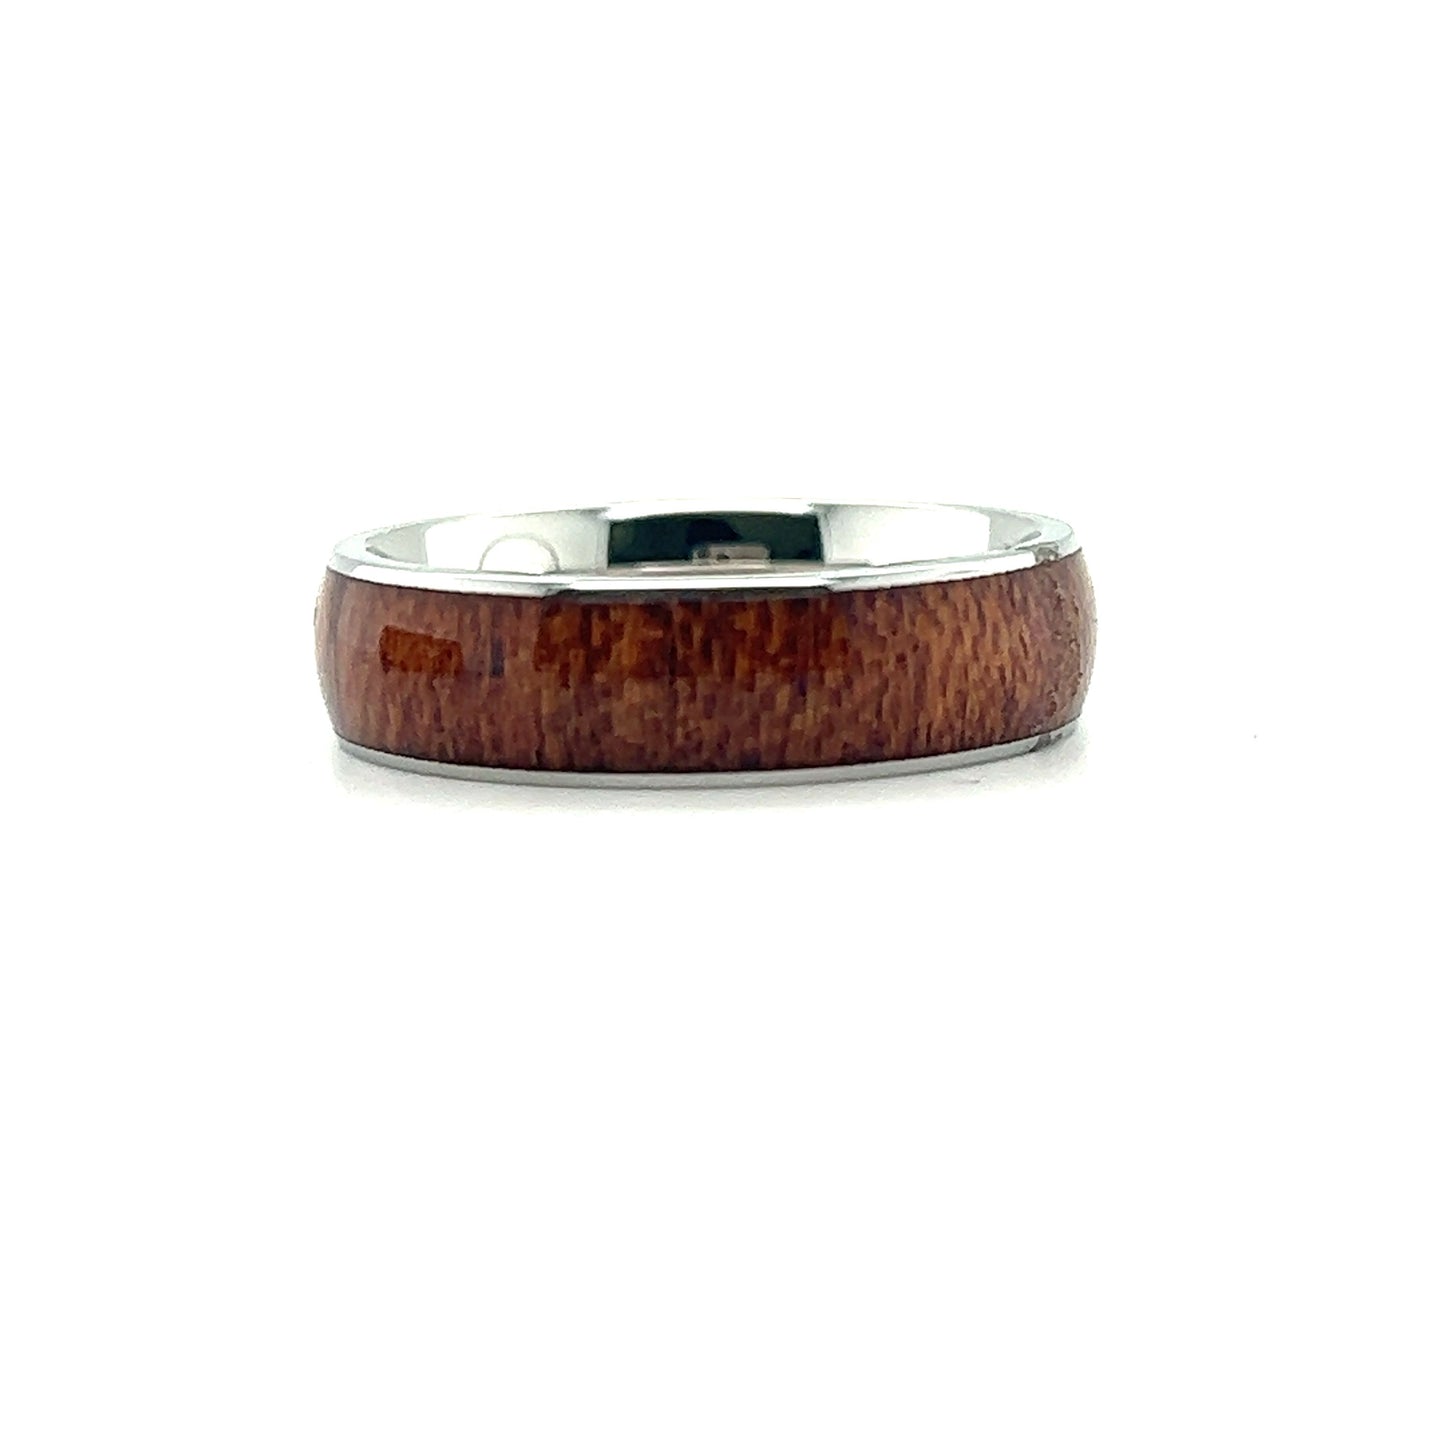 A Koa Wood Stainless Steel Ring with a wooden band by Super Silver.